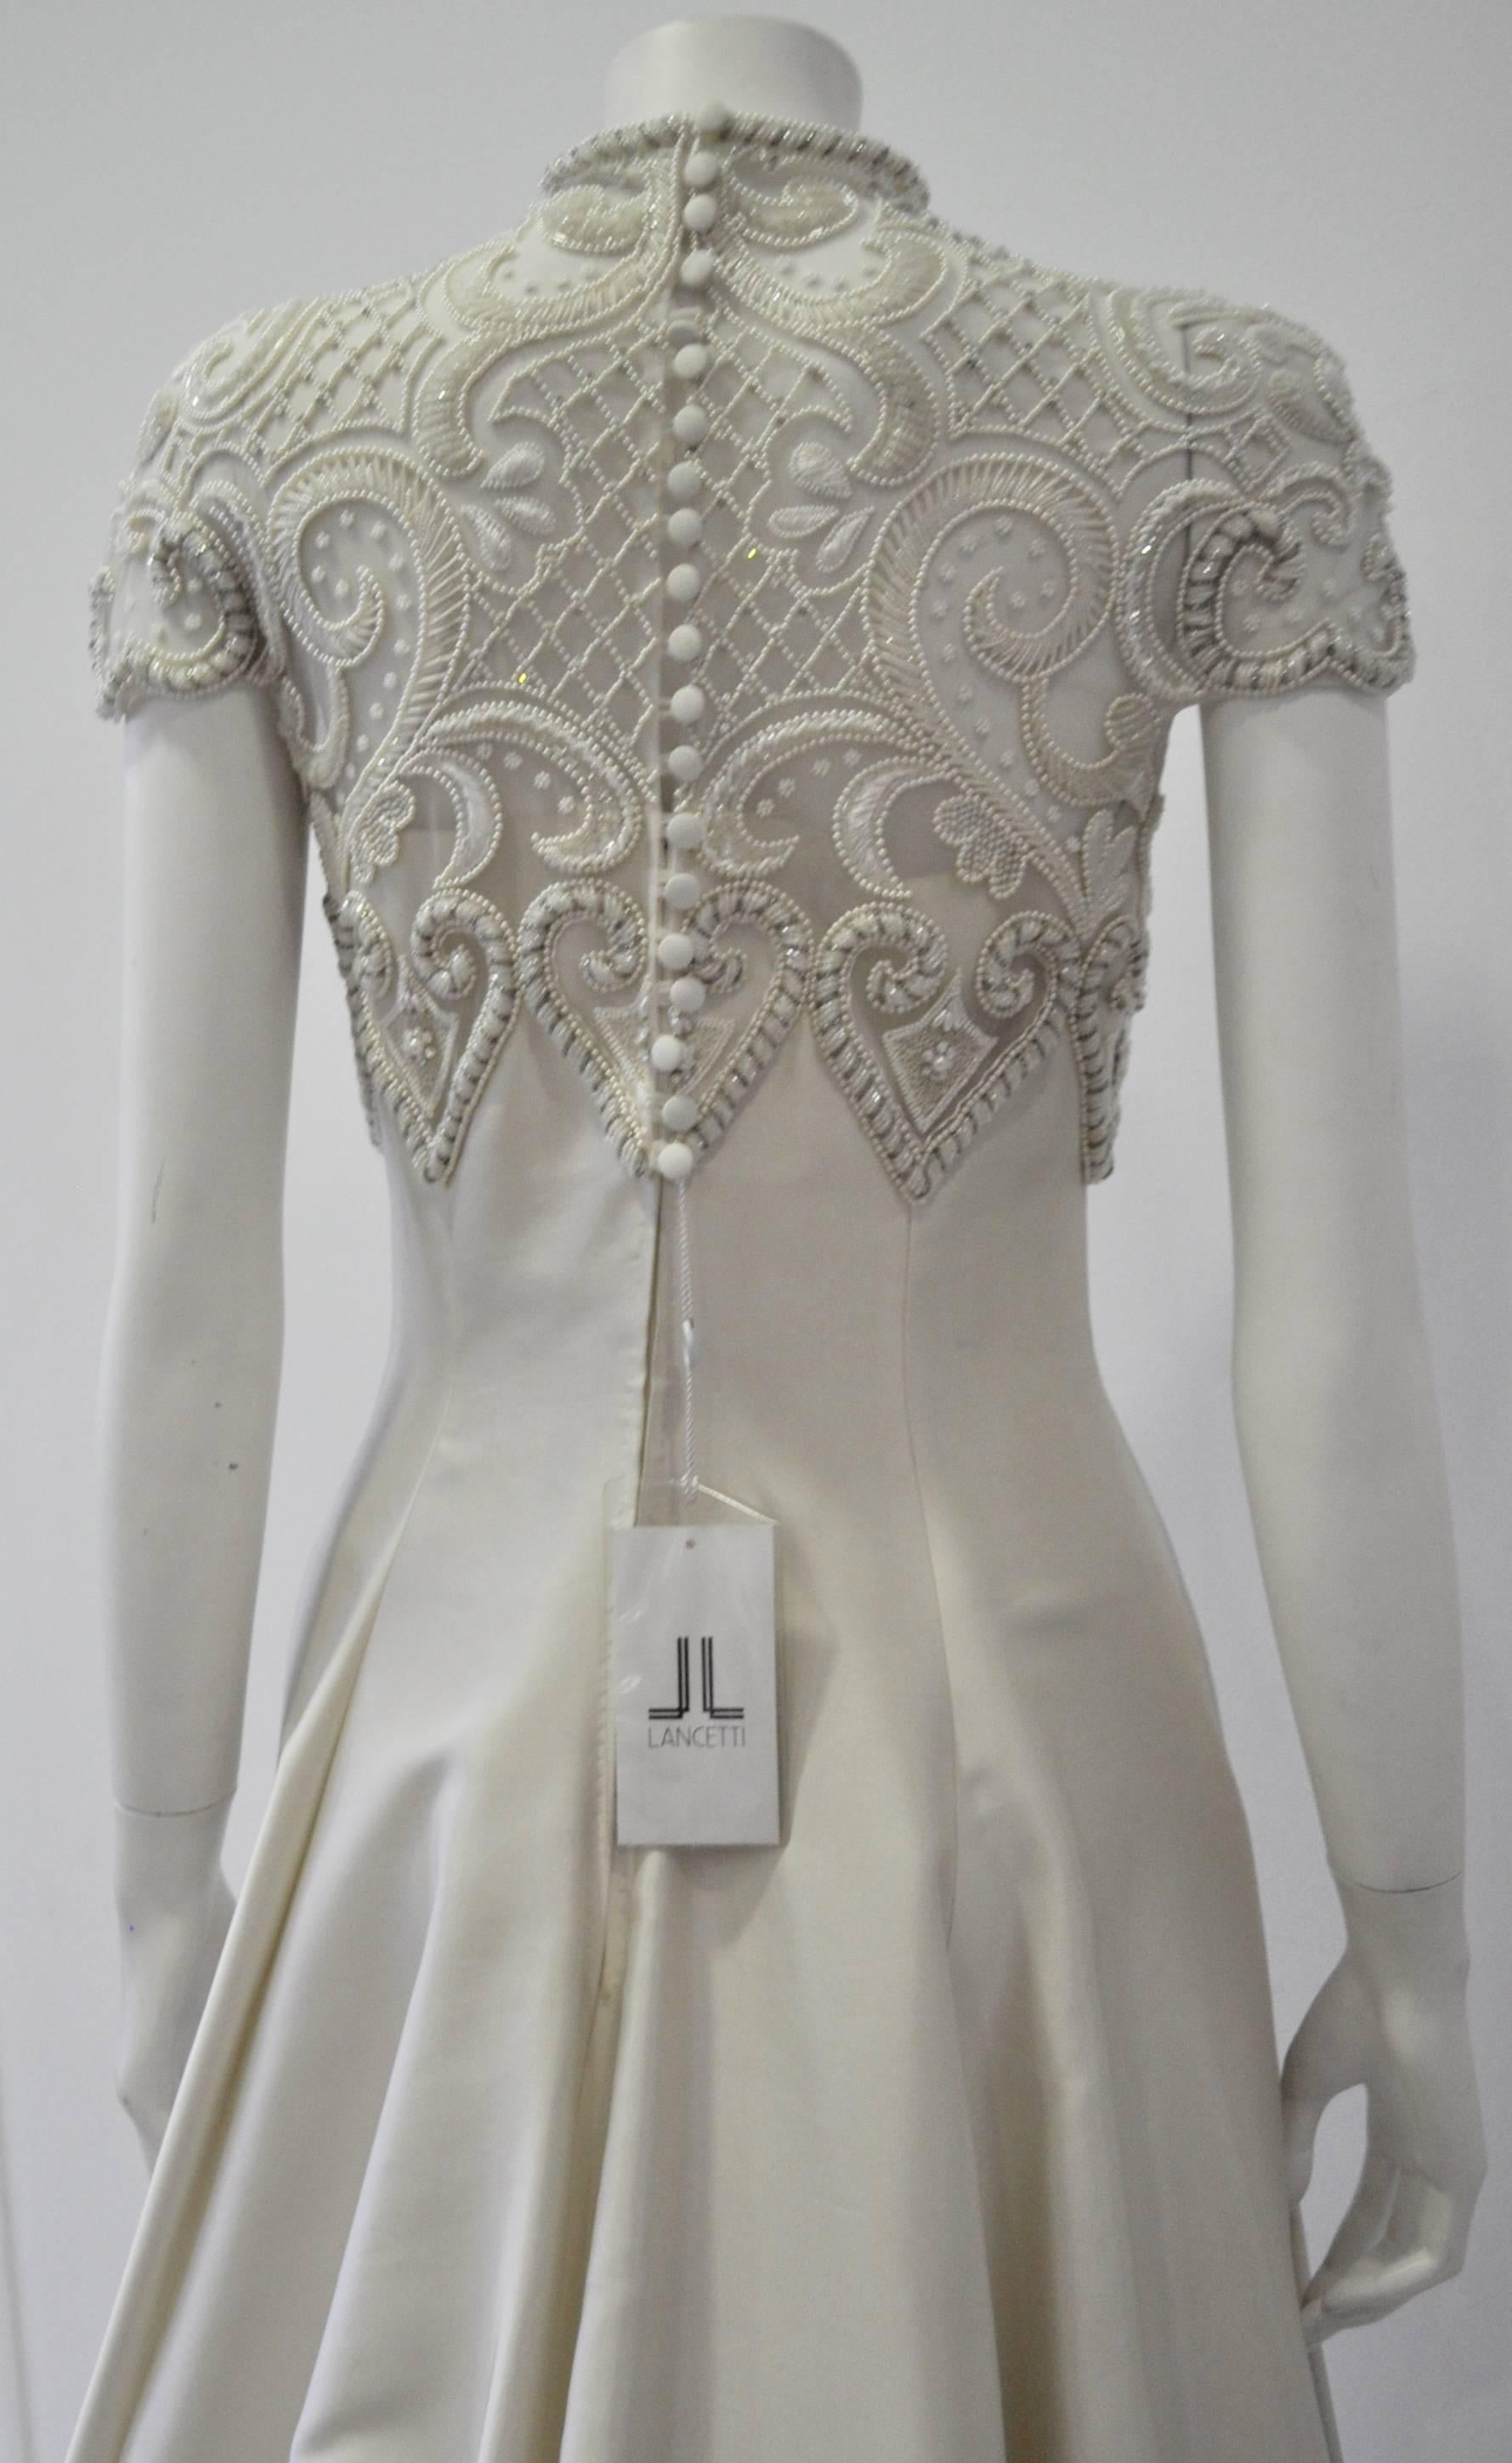 Important Pino Lancetti Hand Embroidered Duchess Satin Wedding Gown For Sale 2